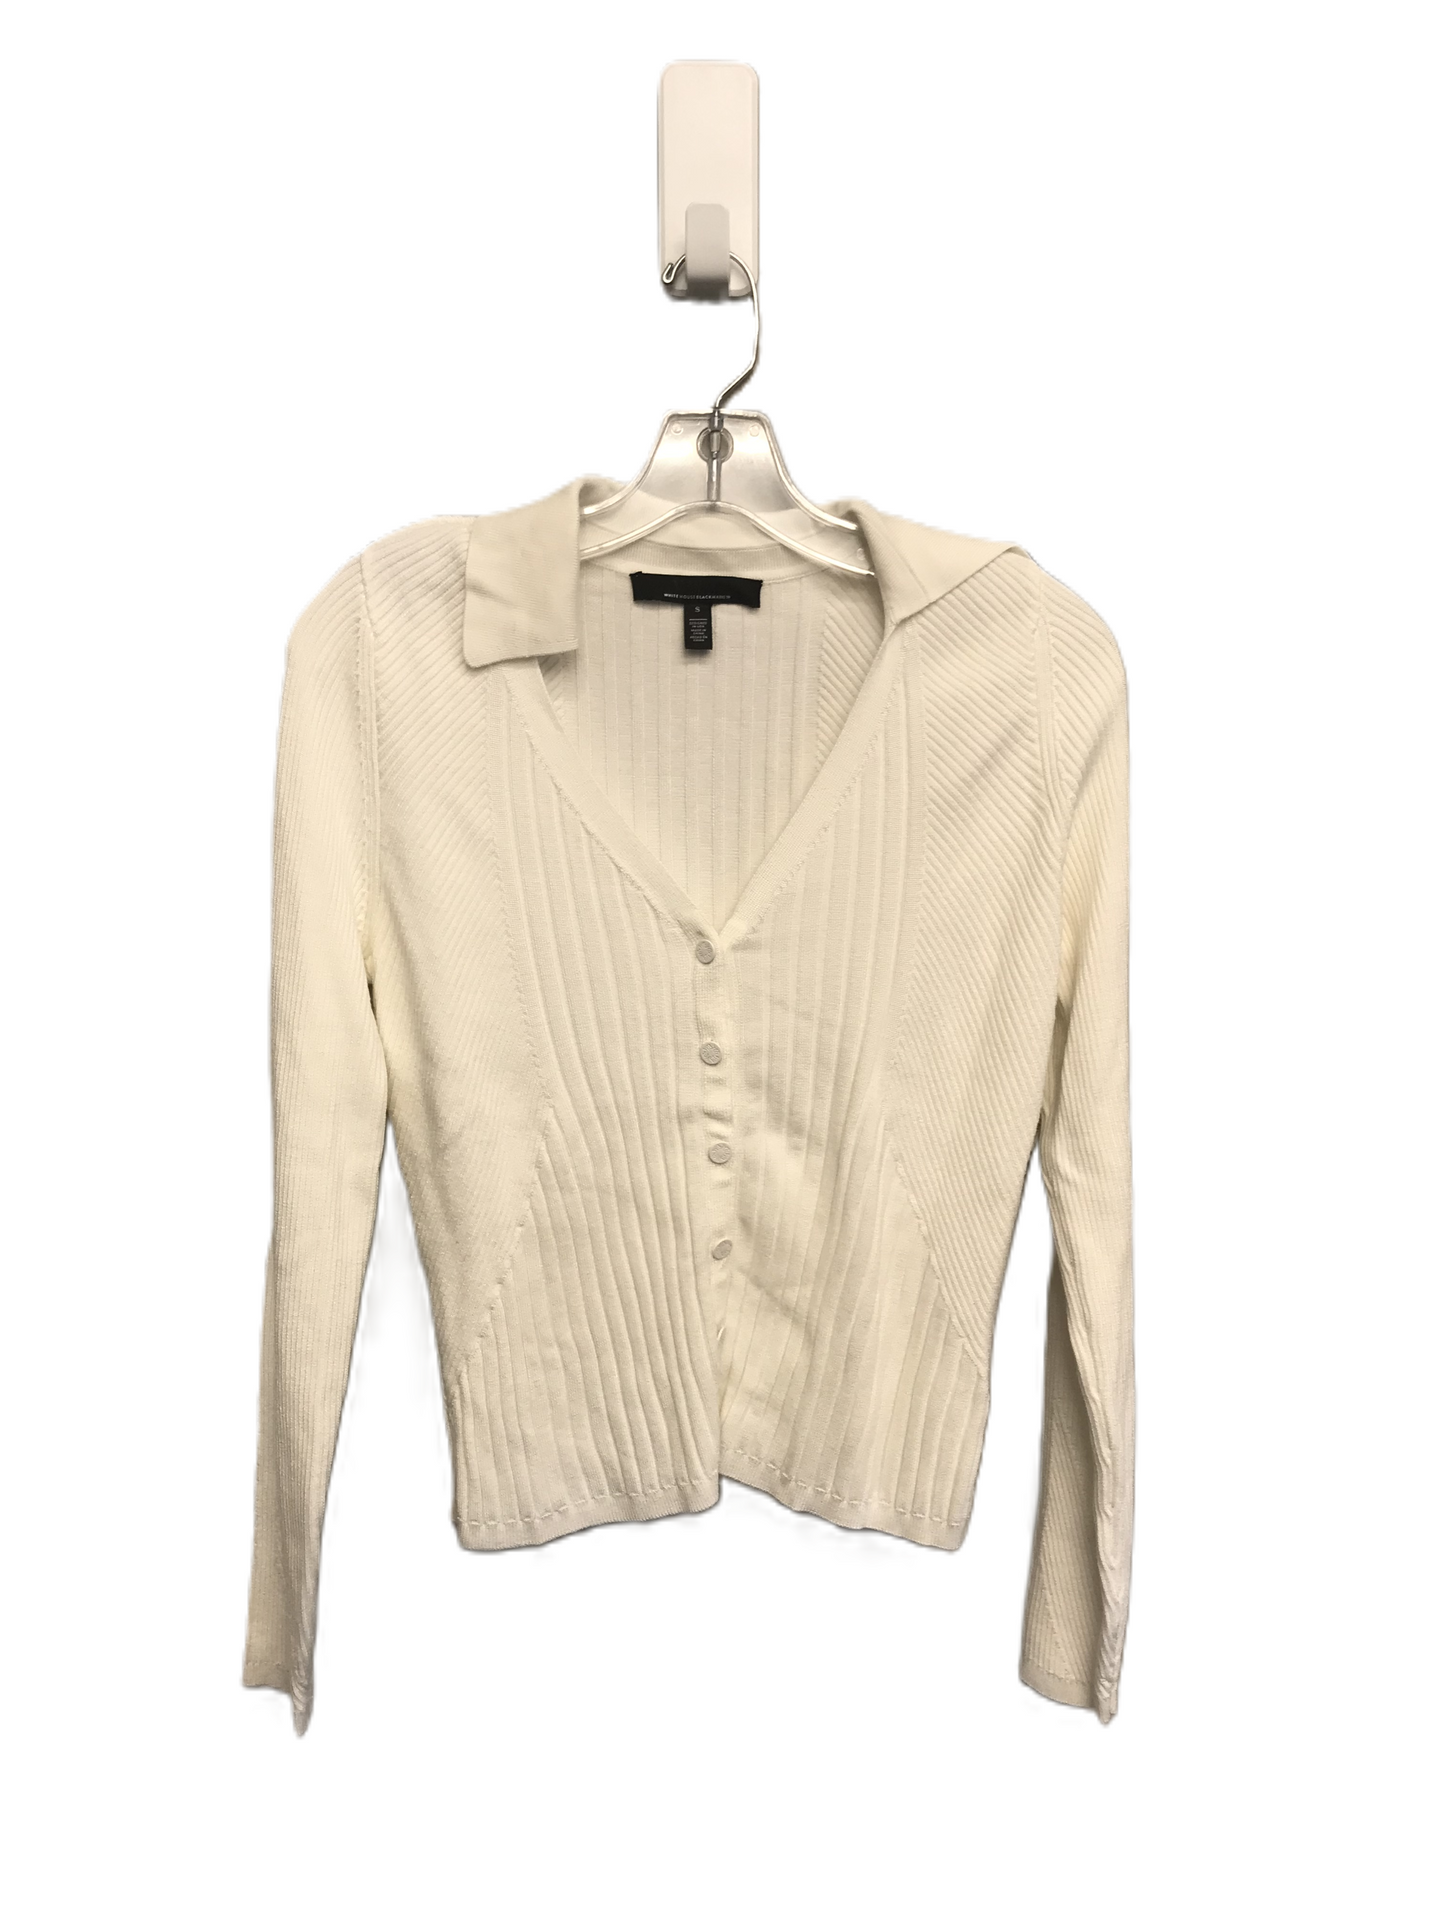 White Sweater Cardigan By White House Black Market, Size: S